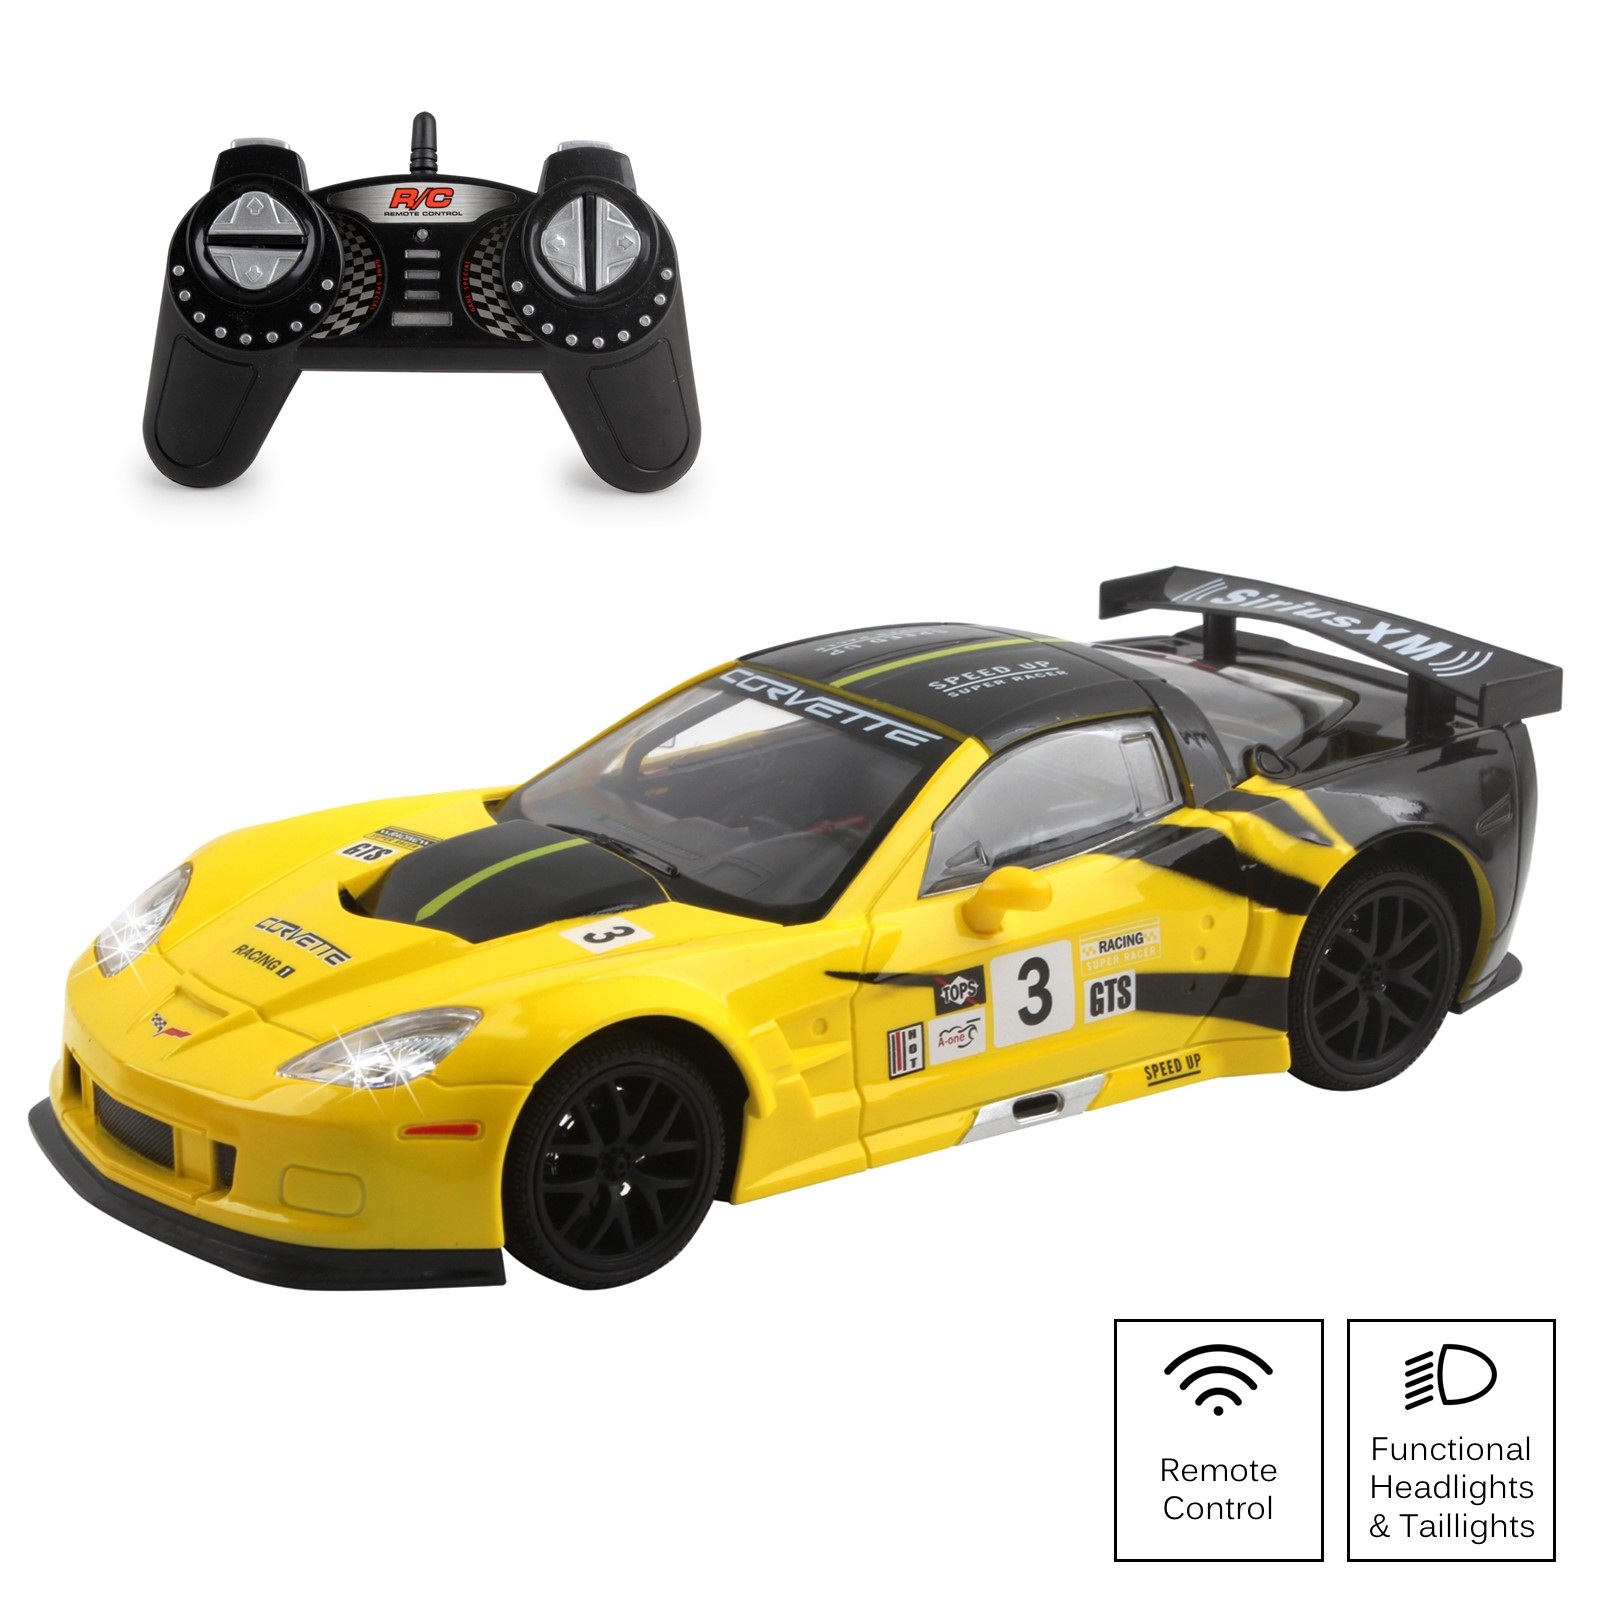 Vokodo RC Super Car 1:18 Scale Remote Control Full Function Corvette with Working LED Headlights Easy to Operate Kids Toy Race Vehicle Perfect Exotic Sports Model Great Gift for Children Boys Girls